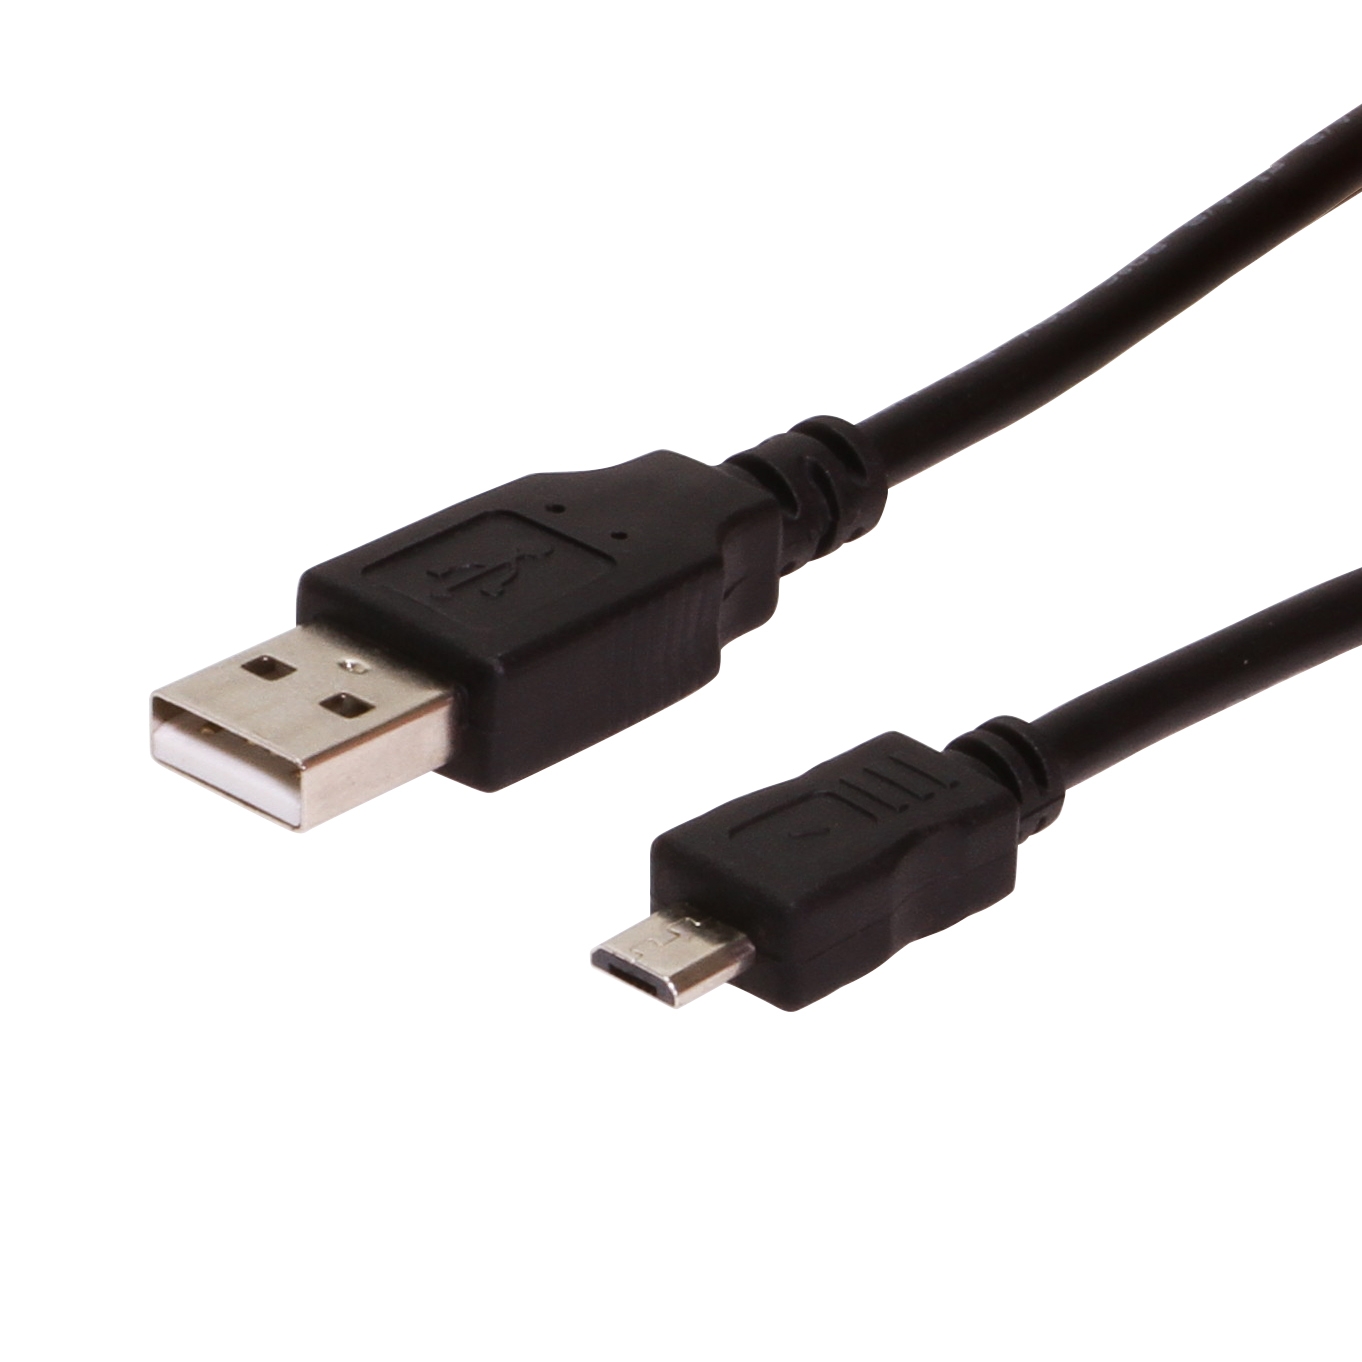 inch USB A male to Micro-B Male Cable